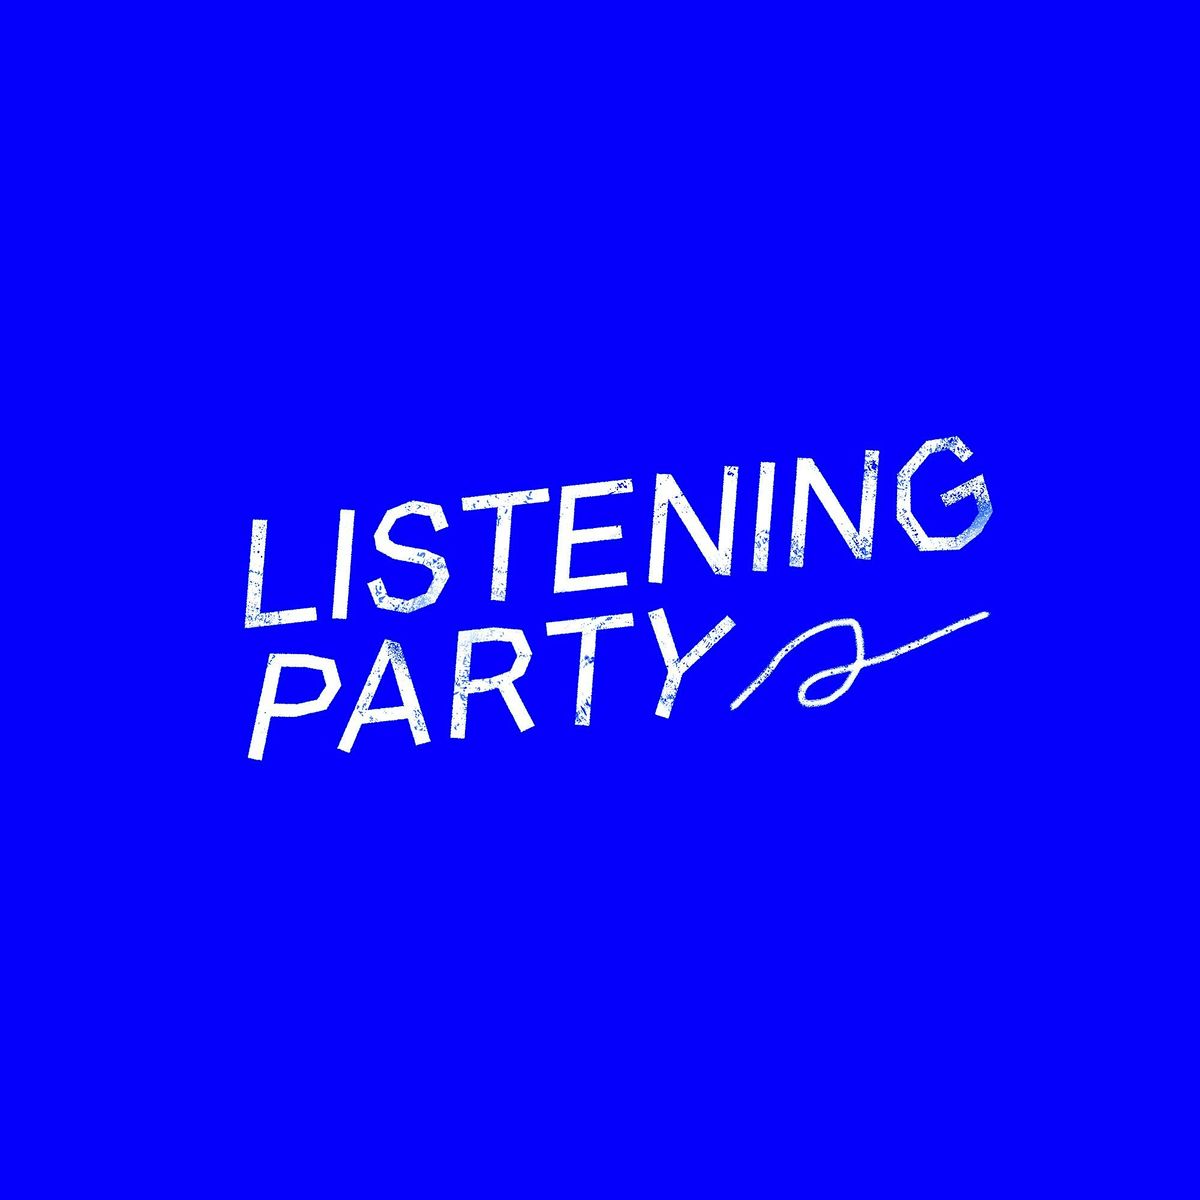 LISTENING PARTY - free monthly artist crit club